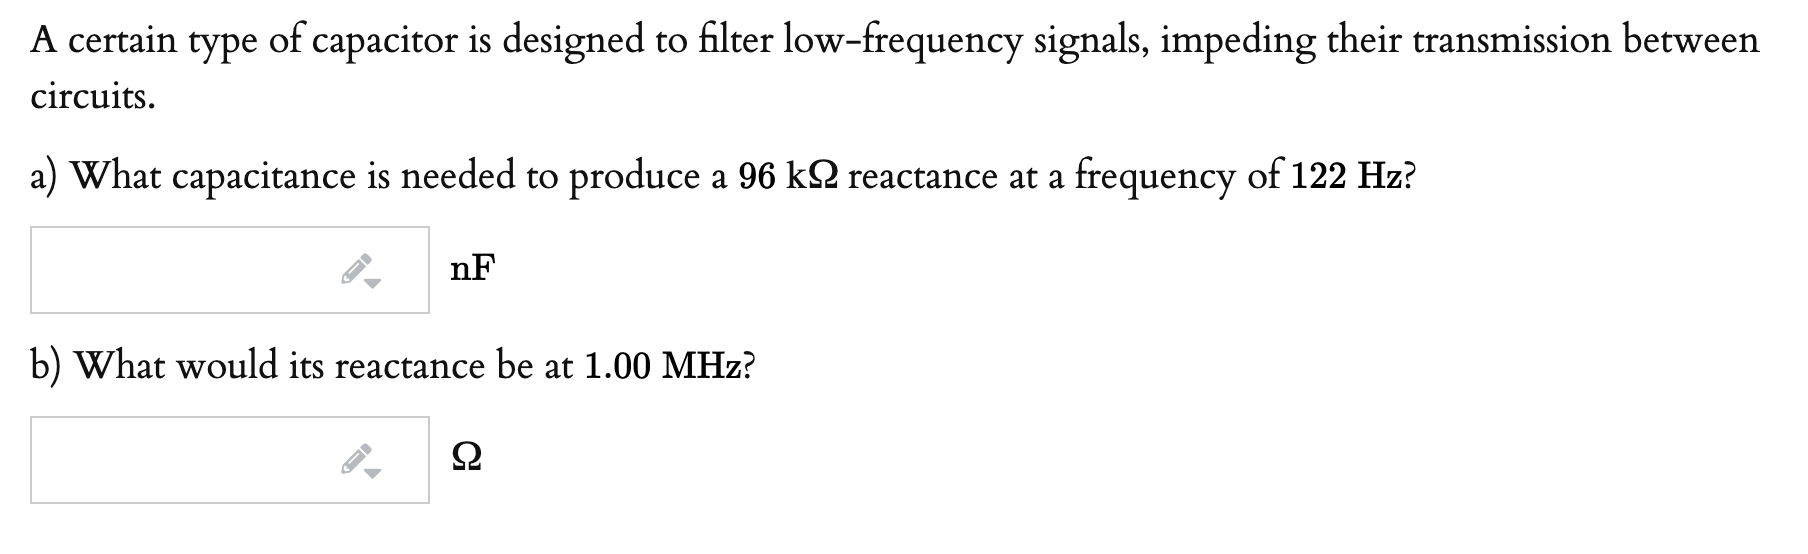 A certain type of capacitor is designed to filter low-frequency signals, impeding their transmission between
circuits.
a) What capacitance is needed to produce a 96 k2 reactance at a frequency of 122 Hz?
nF
b) What would its reactance be at 1.00 MHz?
